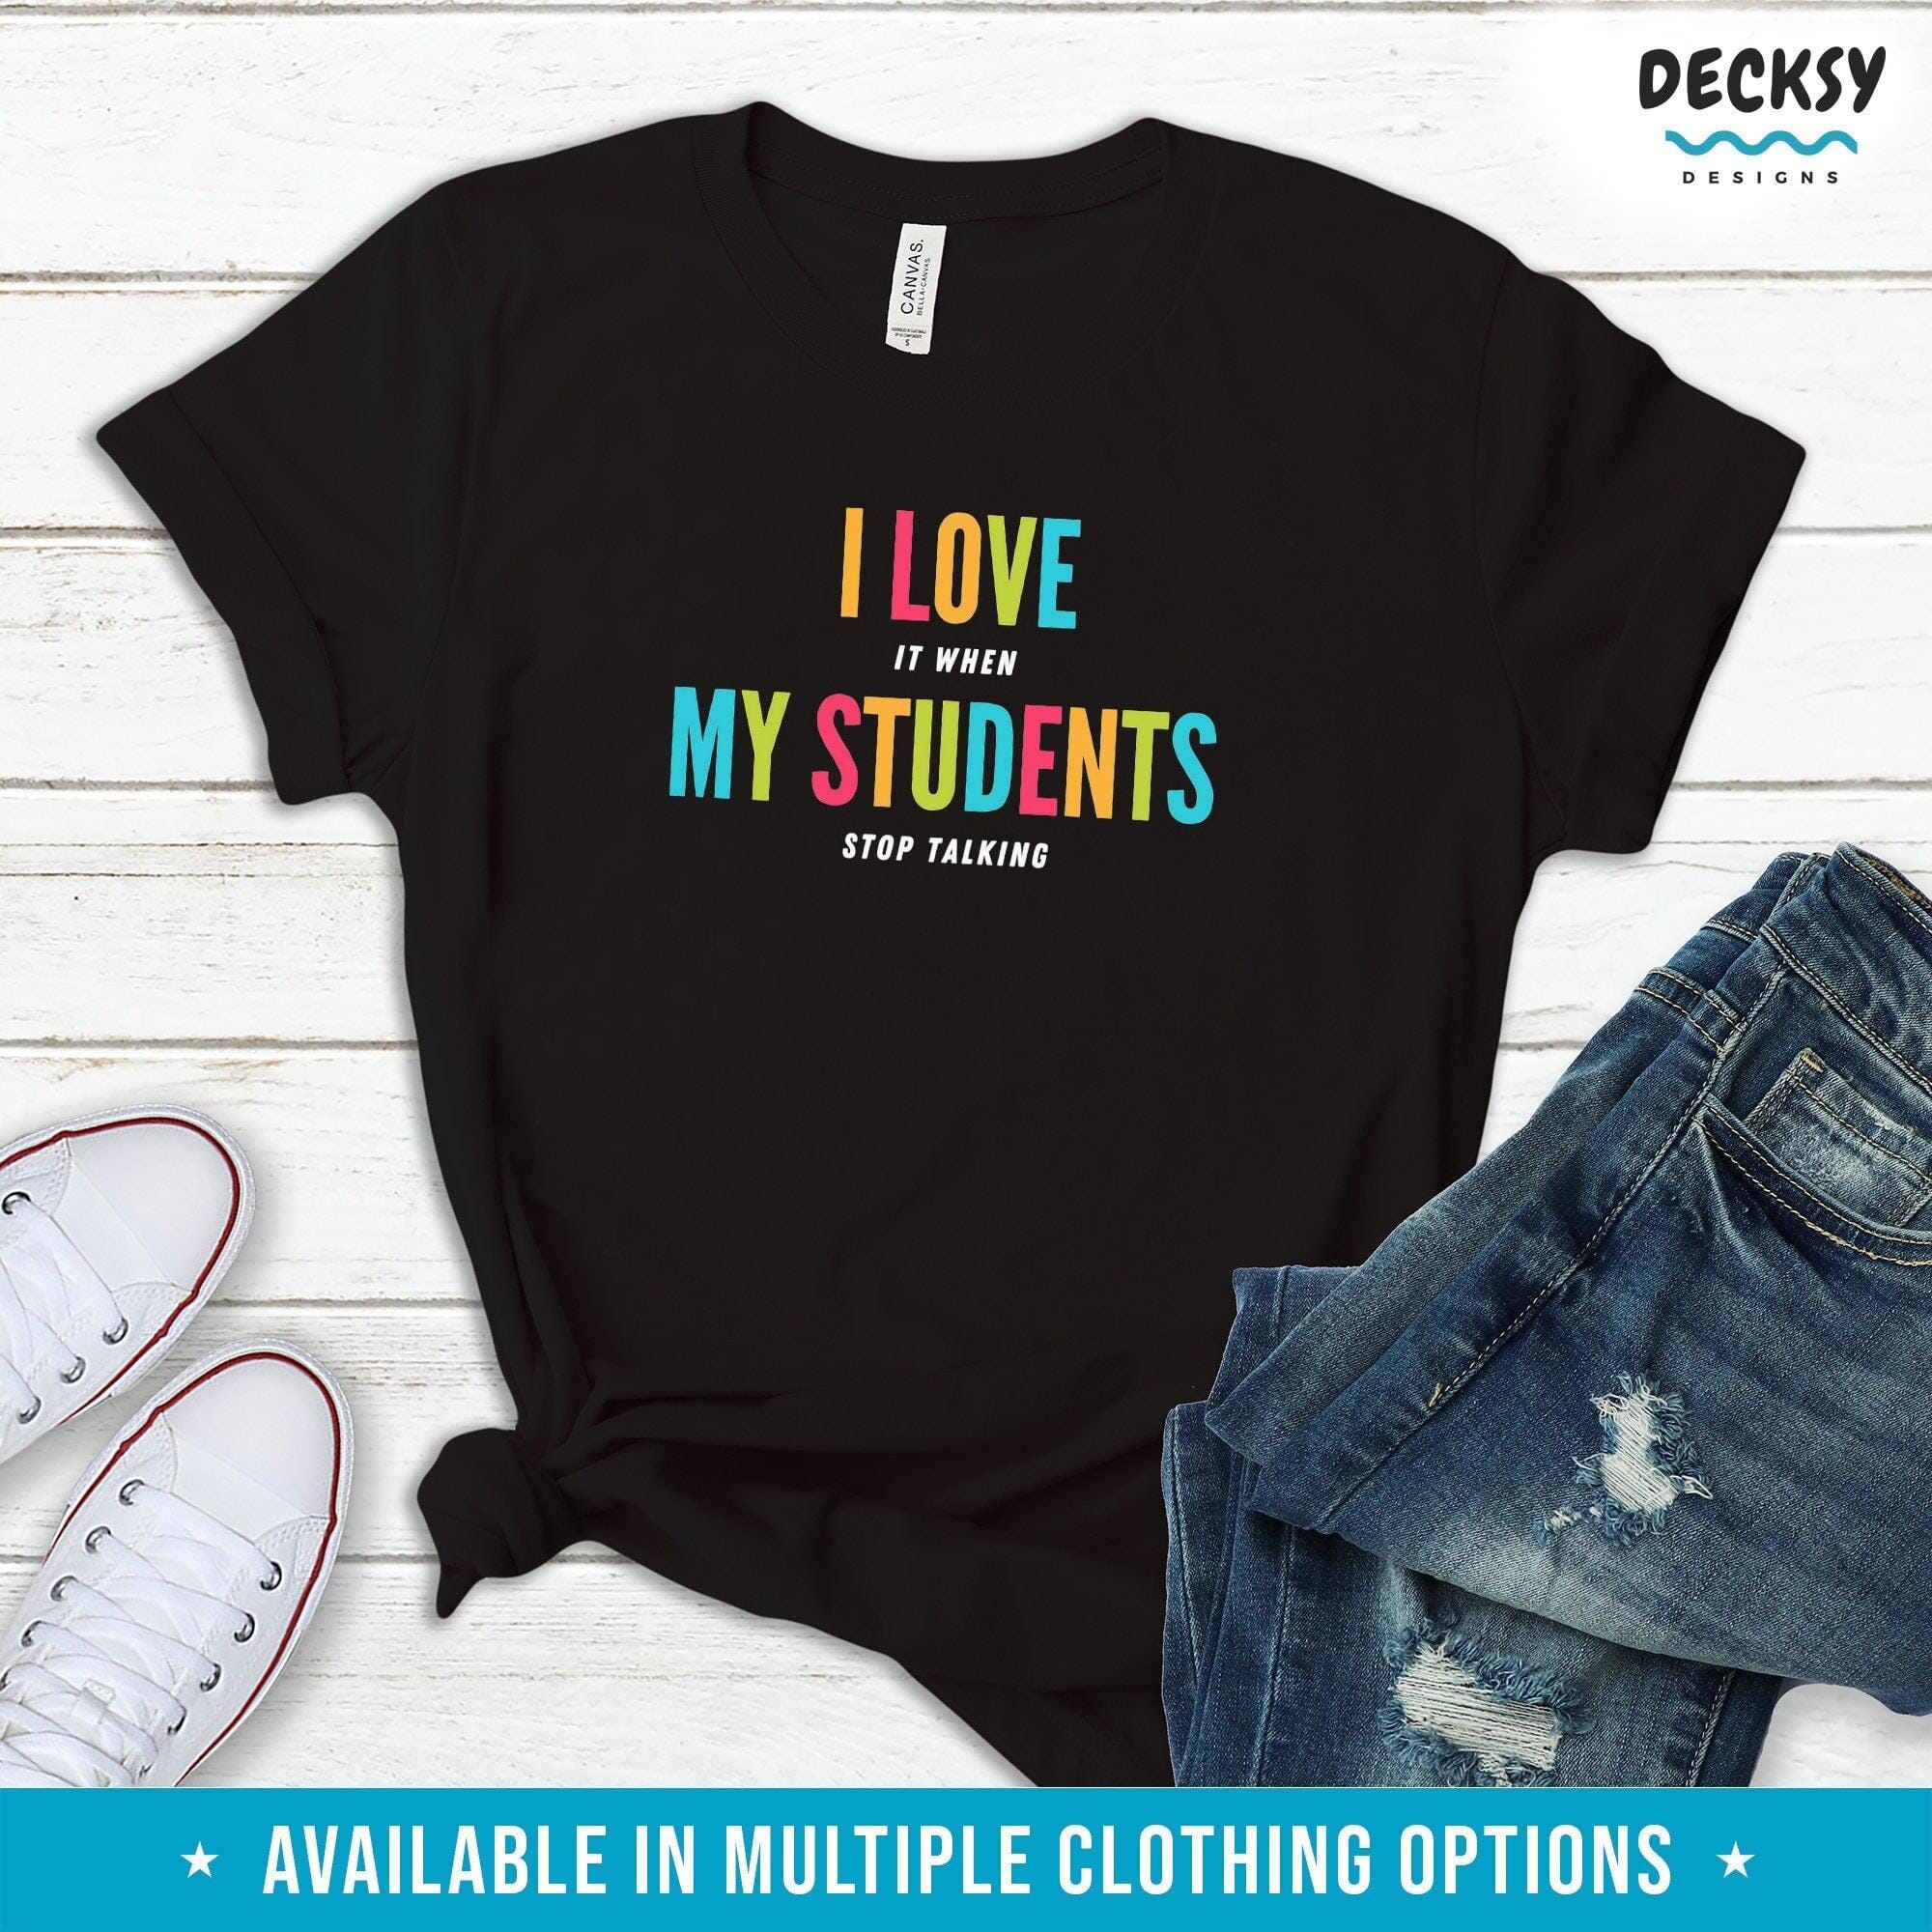 Teacher Sweatshirt, Funny Teacher Gifts-Clothing:Gender-Neutral Adult Clothing:Tops & Tees:T-shirts:Graphic Tees-DecksyDesigns